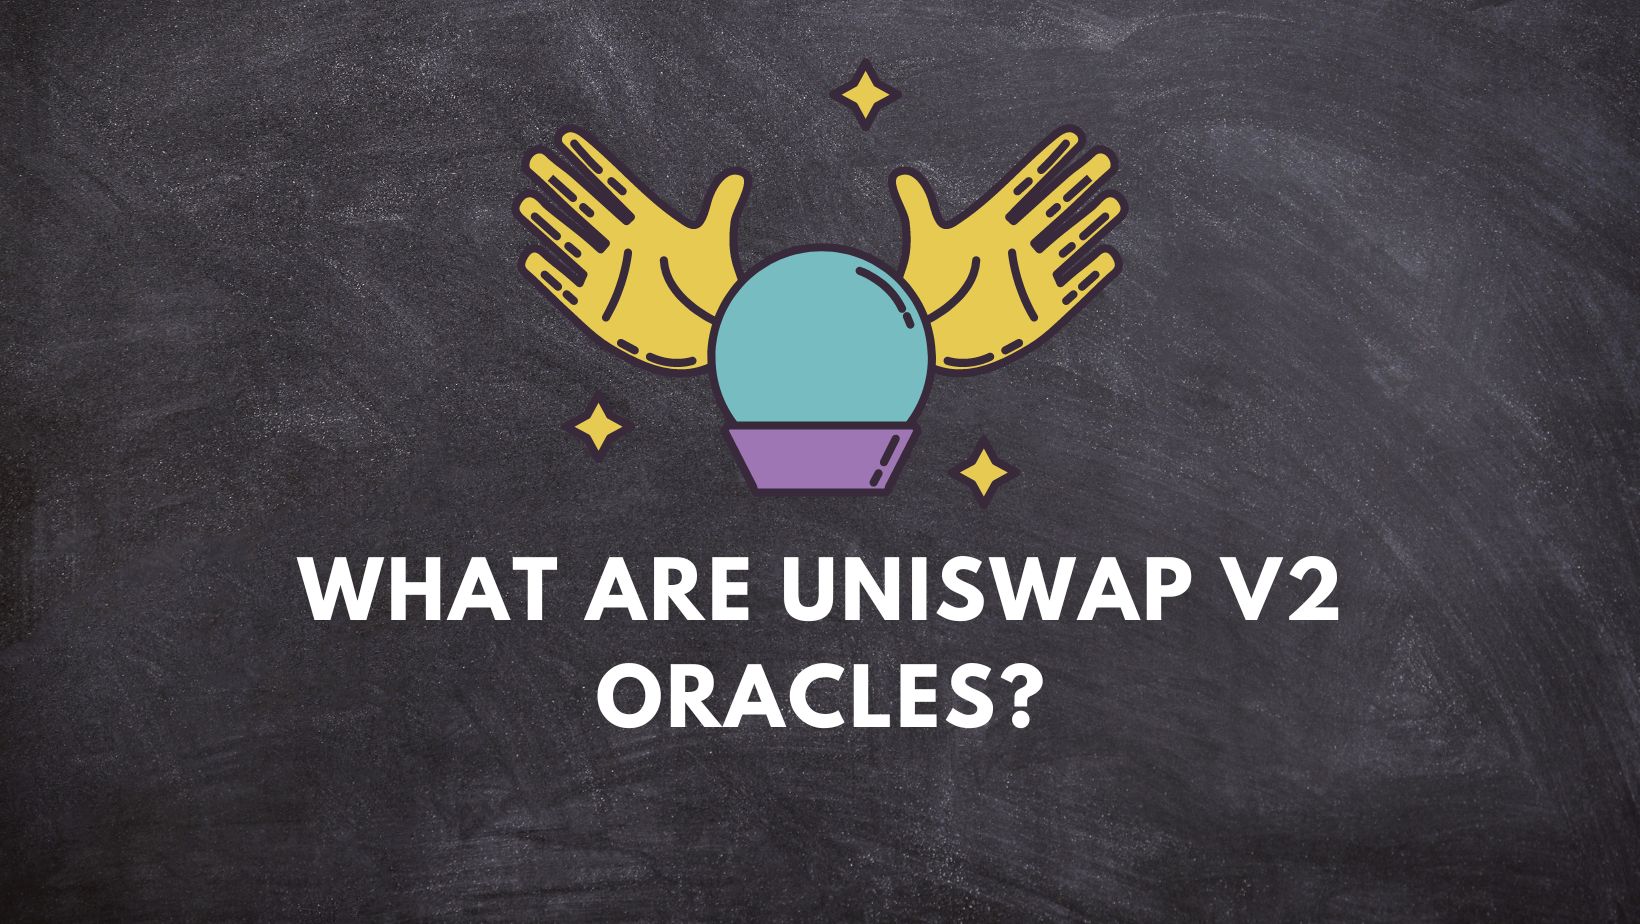 What are Uniswap V2 oracles?